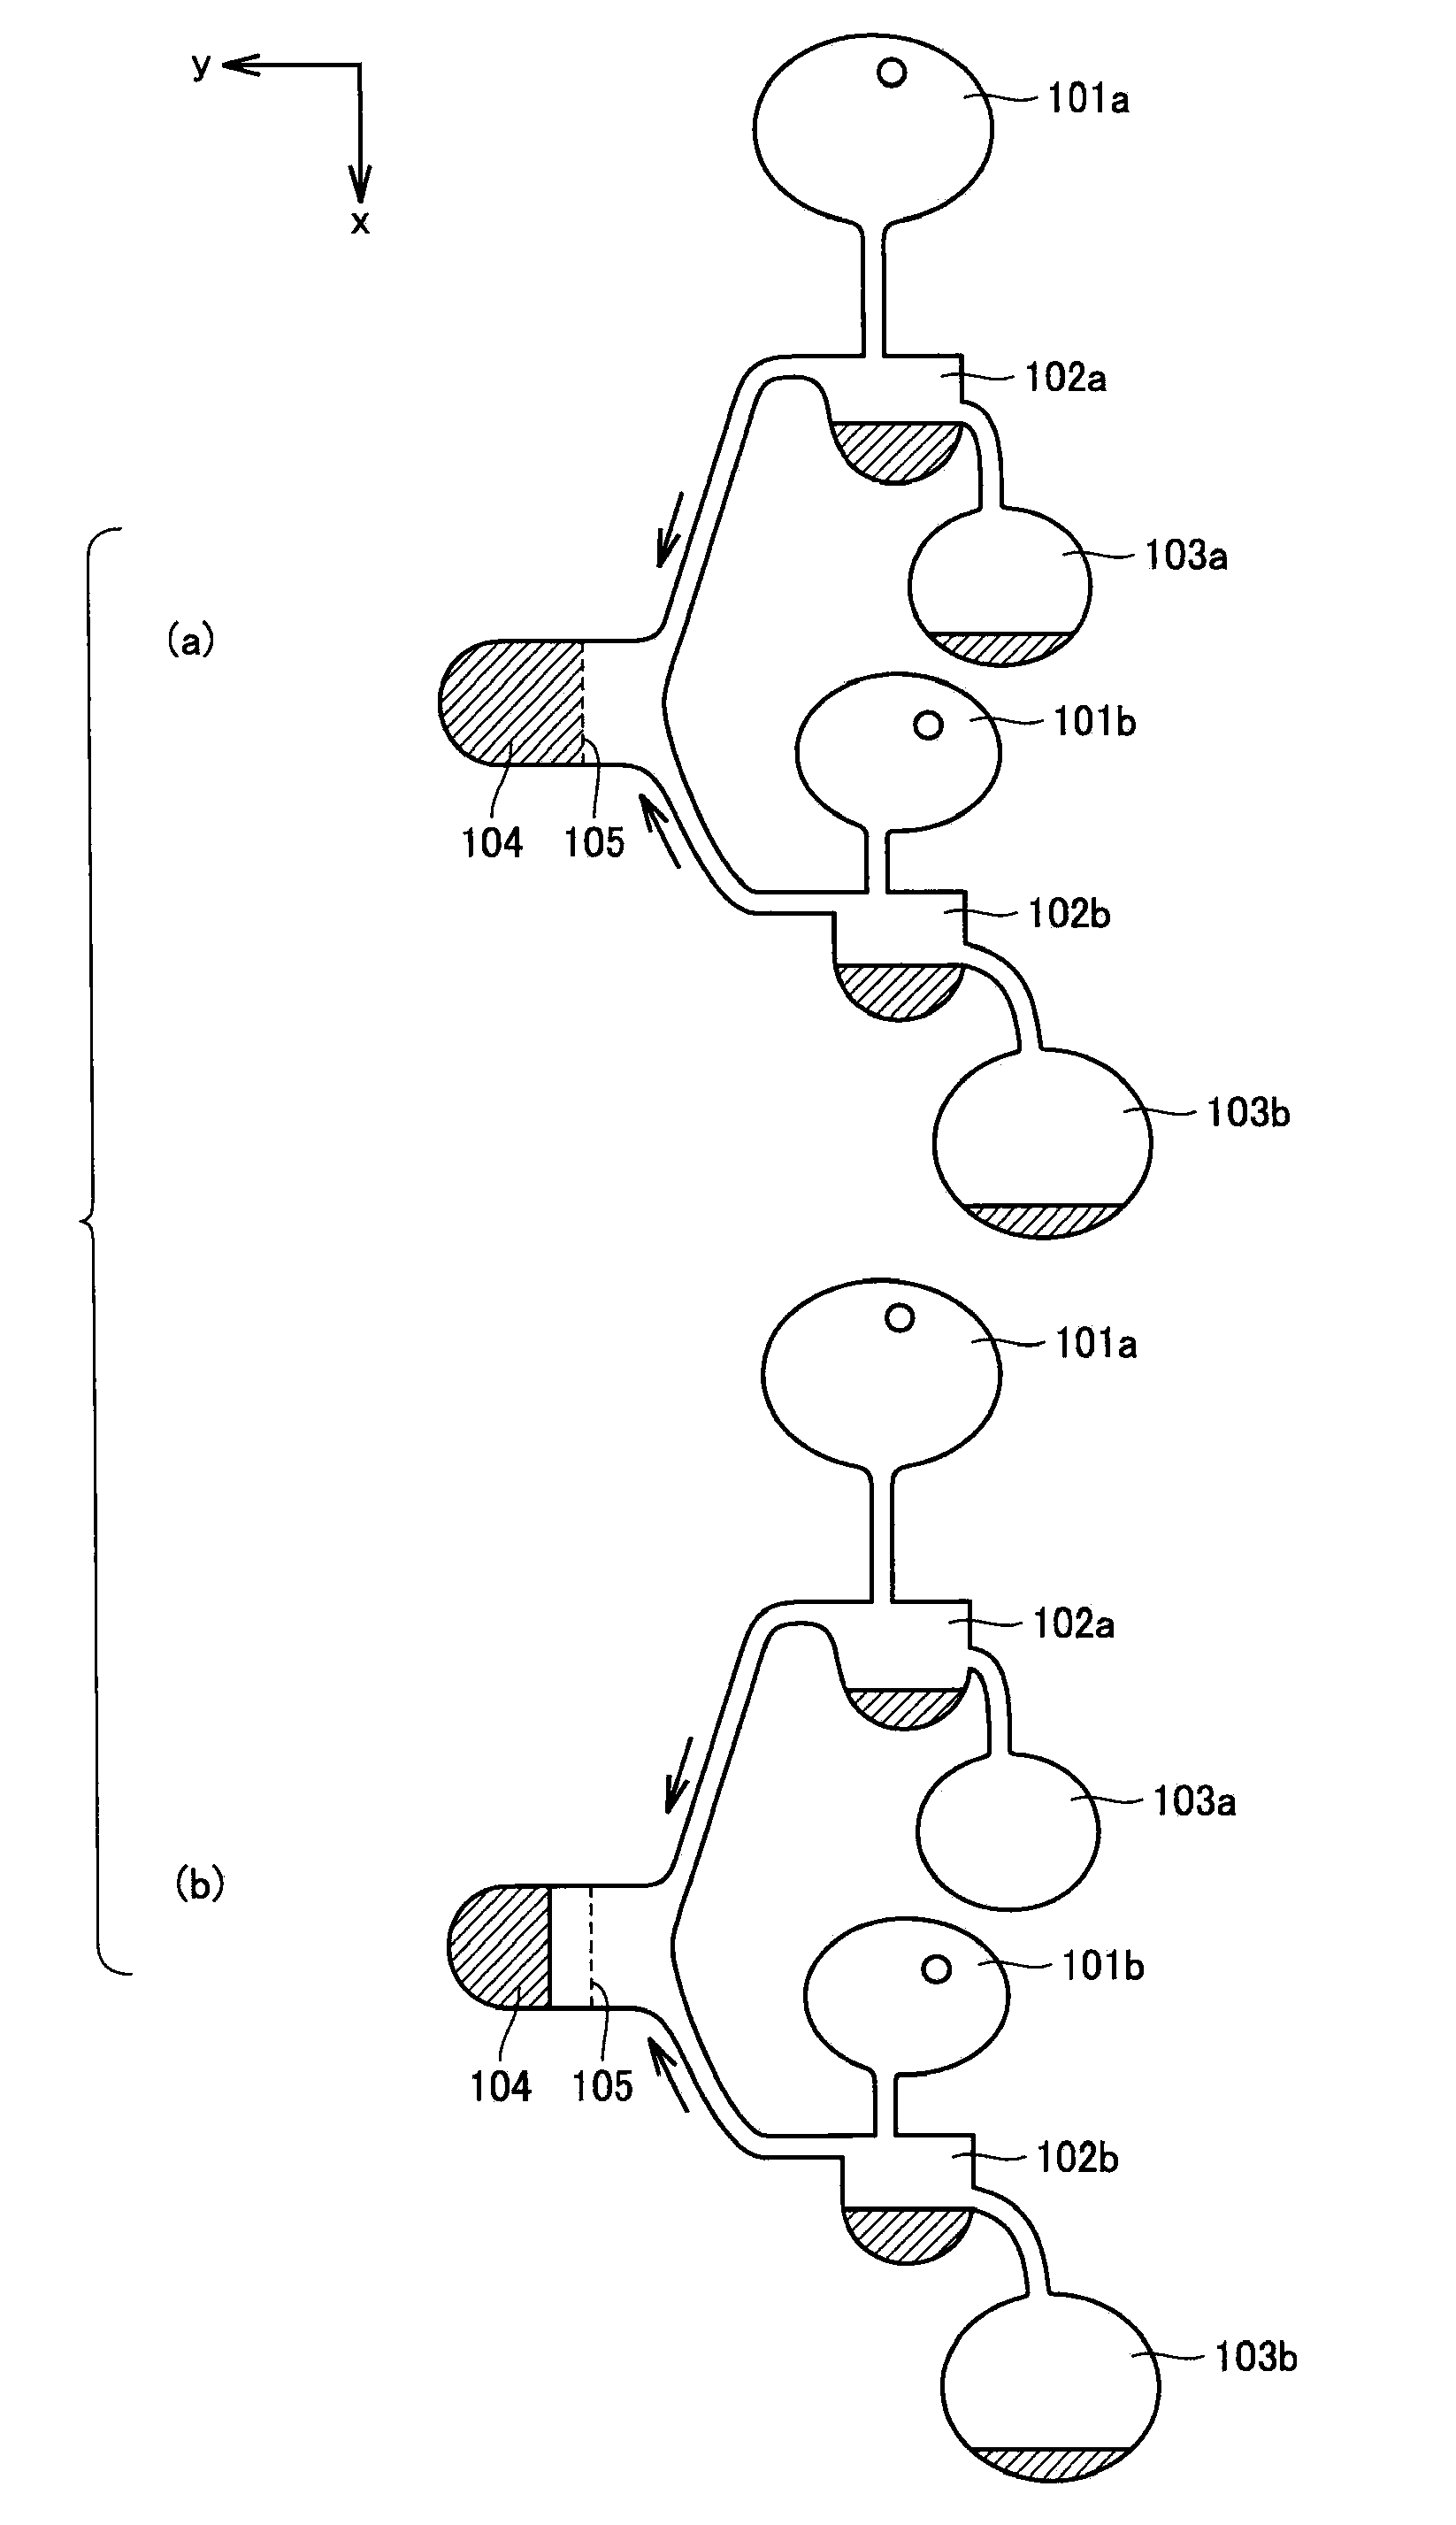 Method of Determining Whether Liquid Amount and/or Quality of Liquid Reagent Are/Is Normal in Liquid-Reagent-Containing Microchip and Liquid-Reagent-Containing Microchip